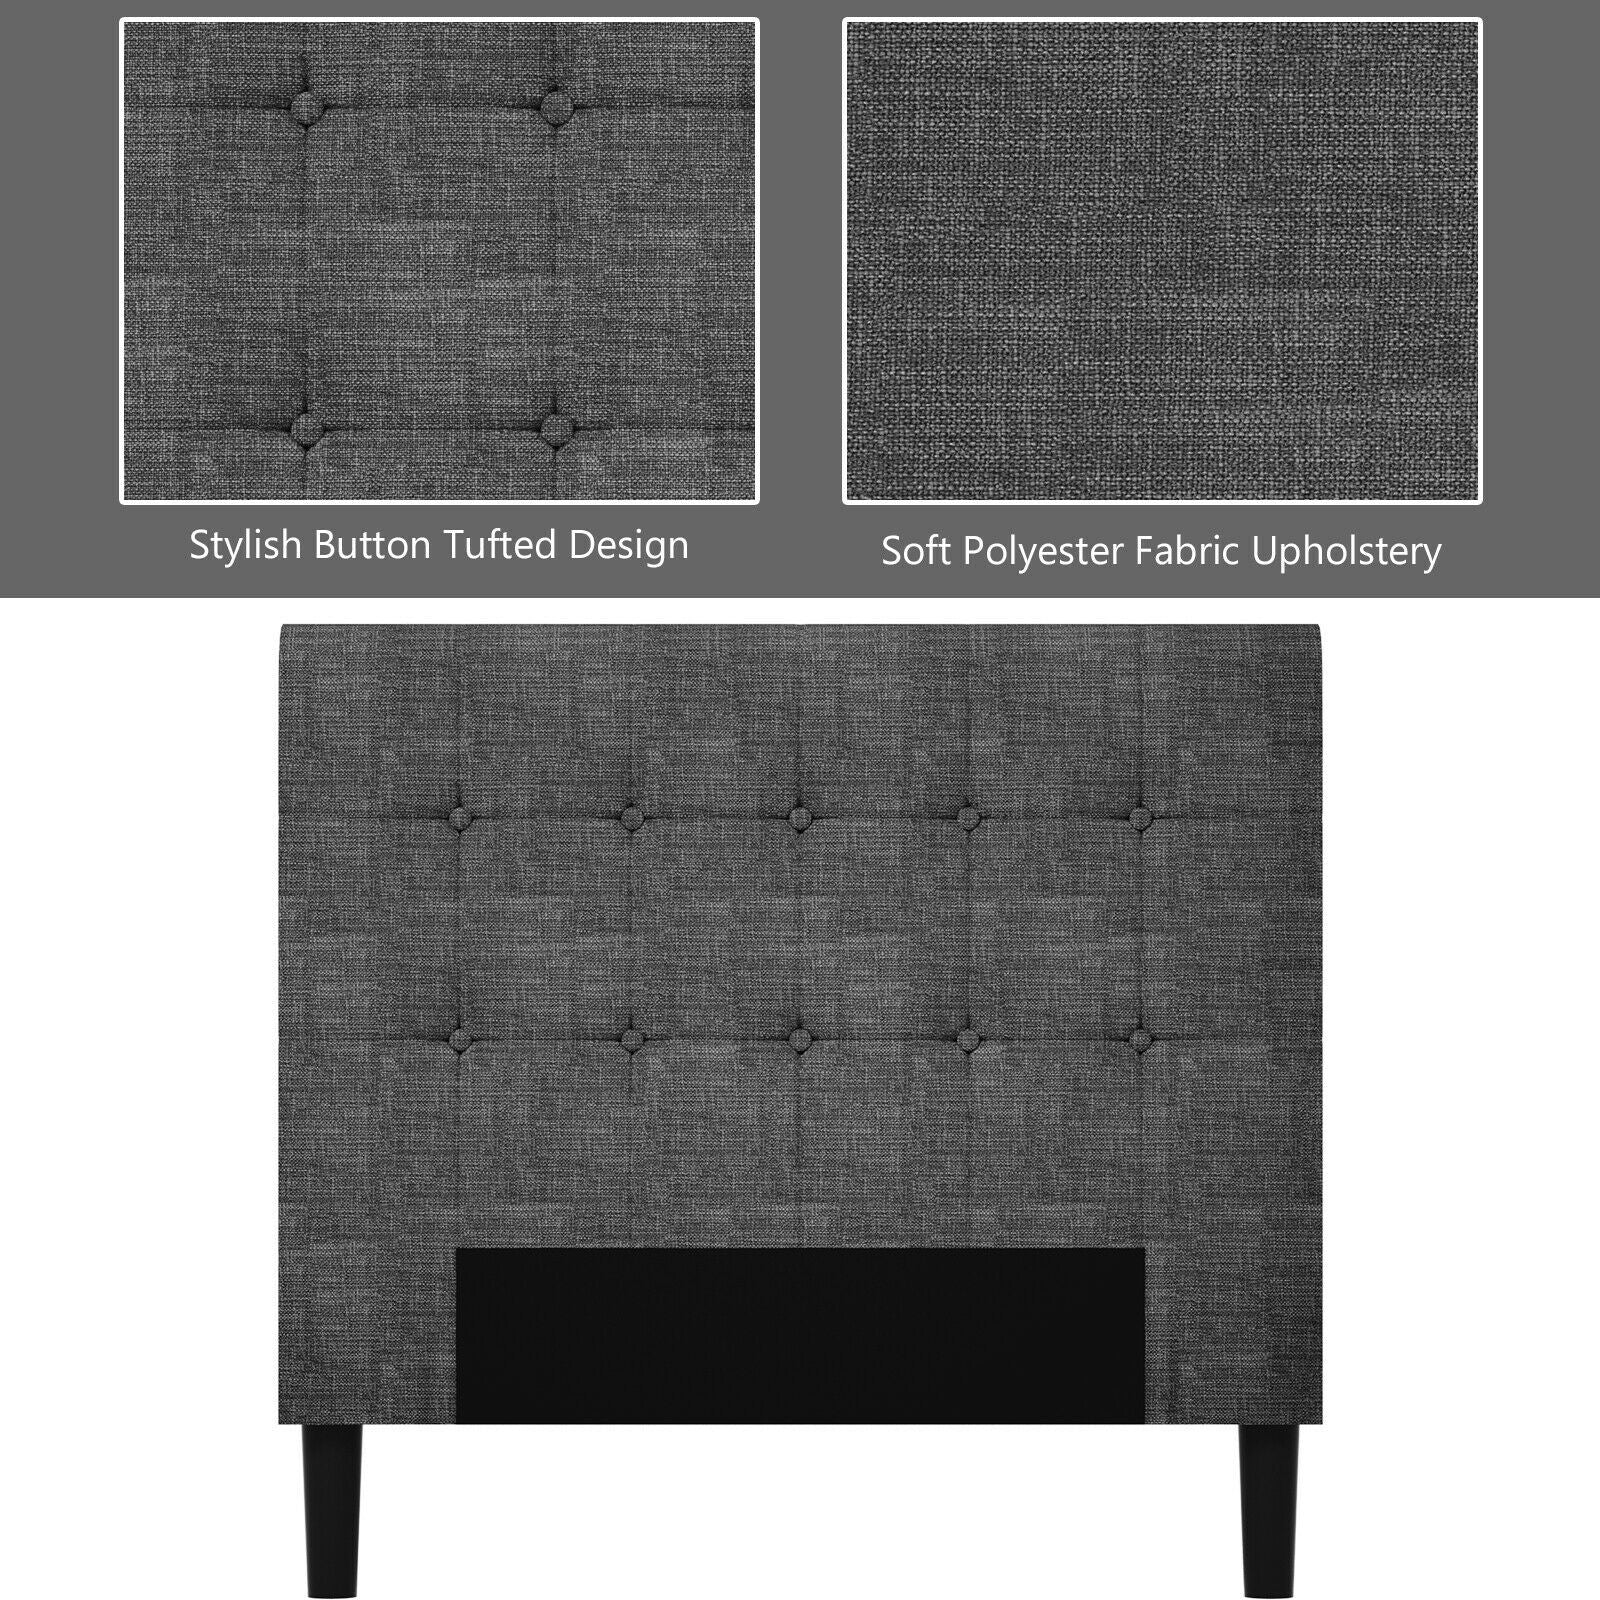 Platform Bed with Button Tufted Headboard | Upholstered Bed Frame